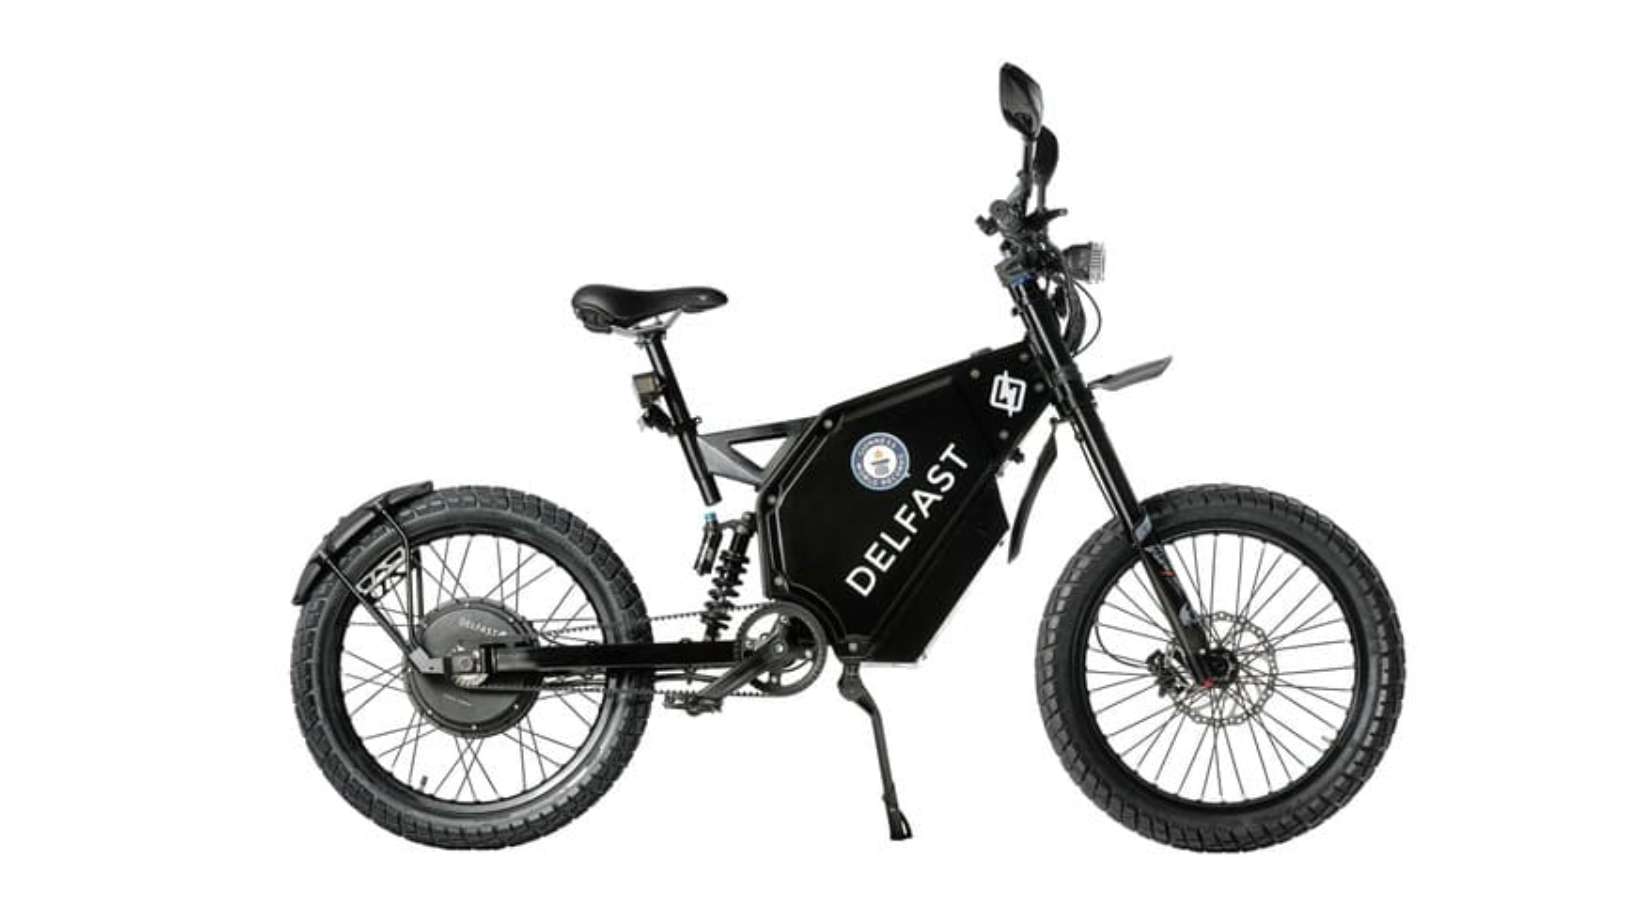 Buying Considerations for a 3000W Electric Bike